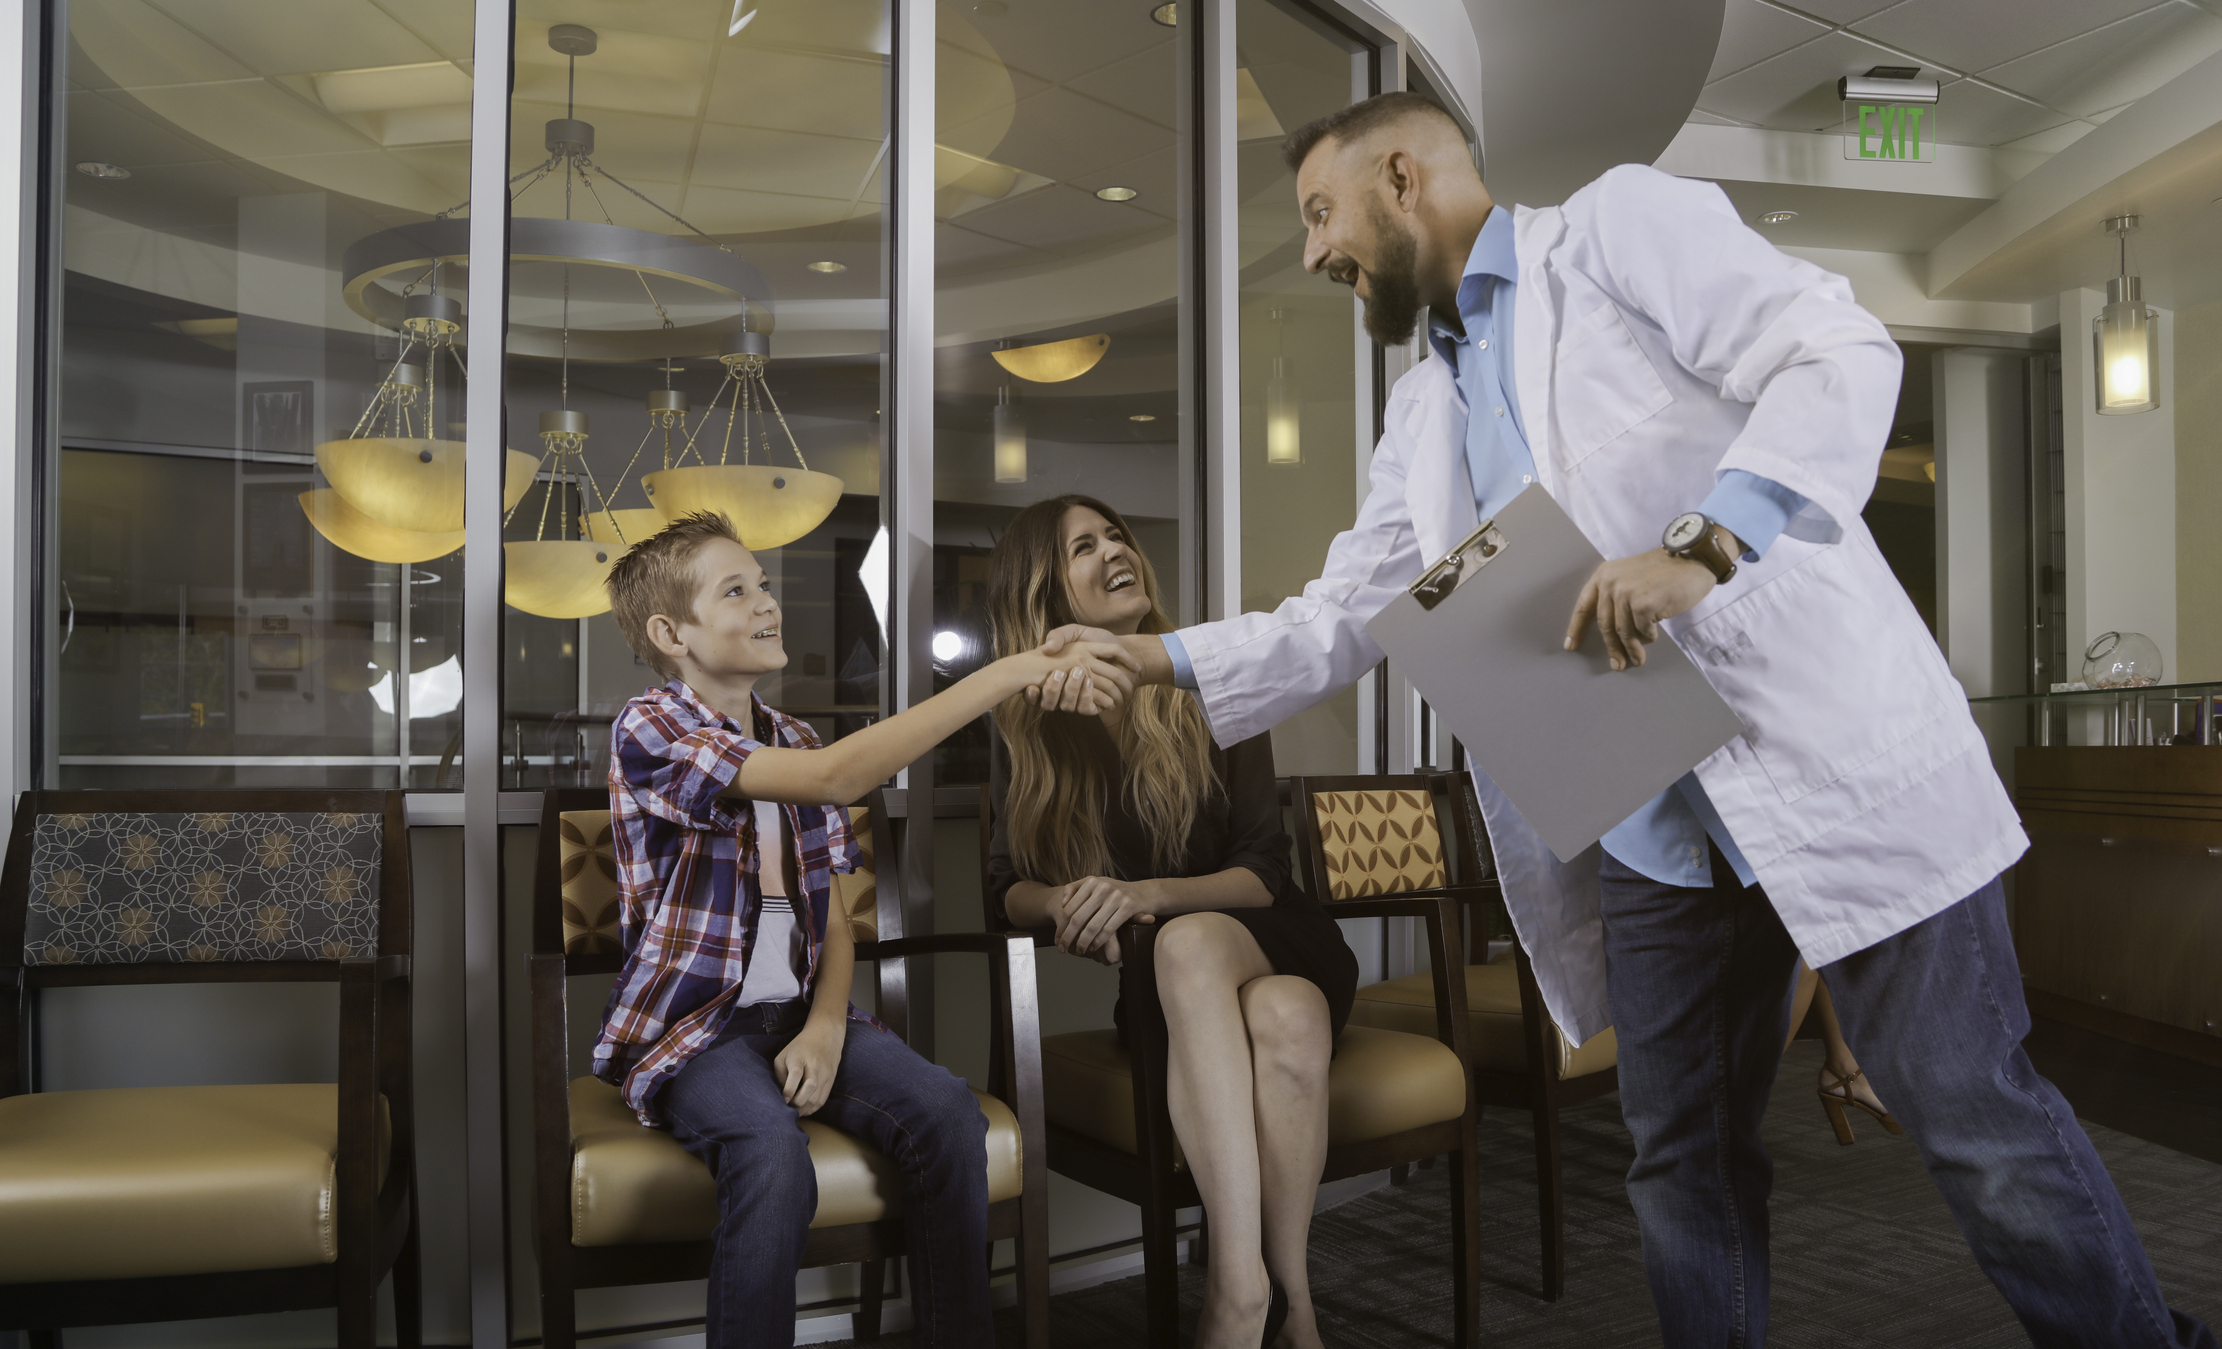 Doctor greeting patients in waiting room with hand shake